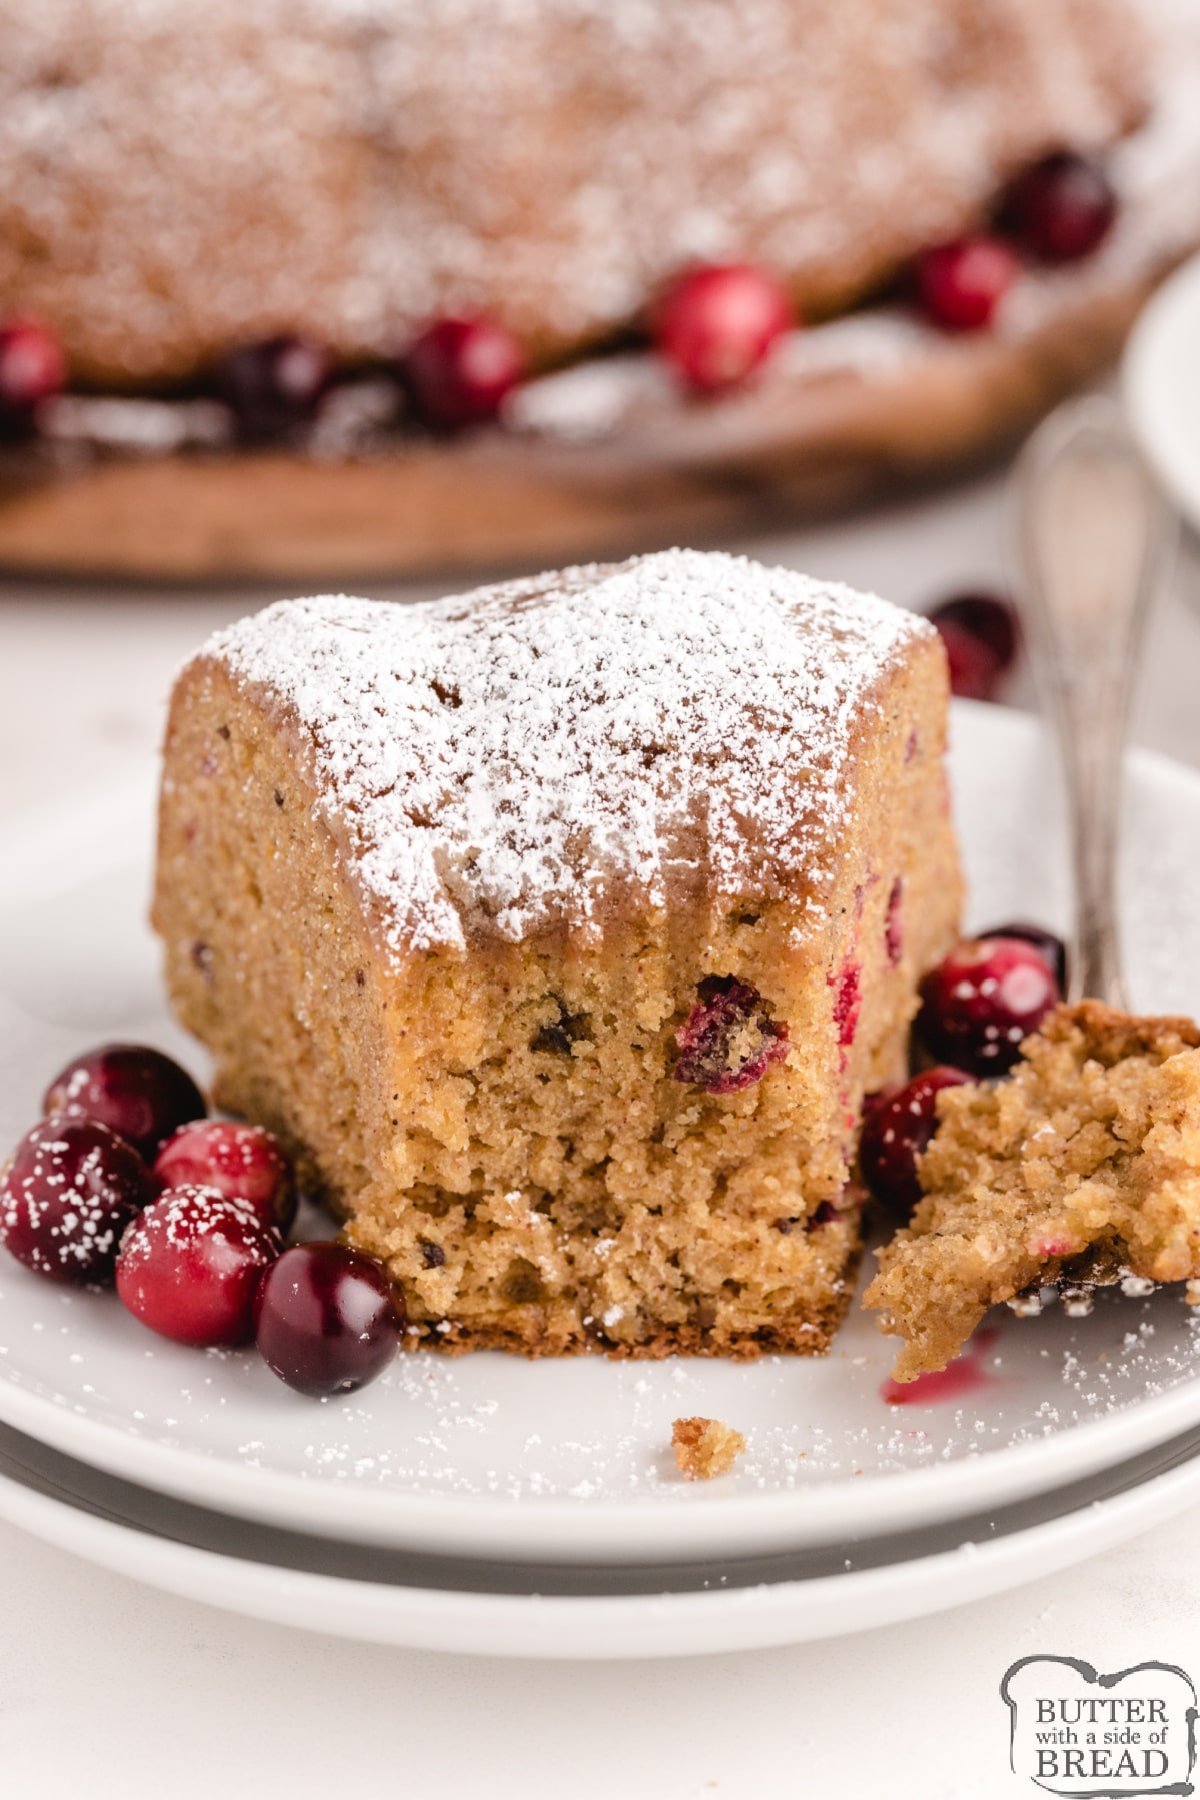 Pumpkin cake made from scratch with cranberries